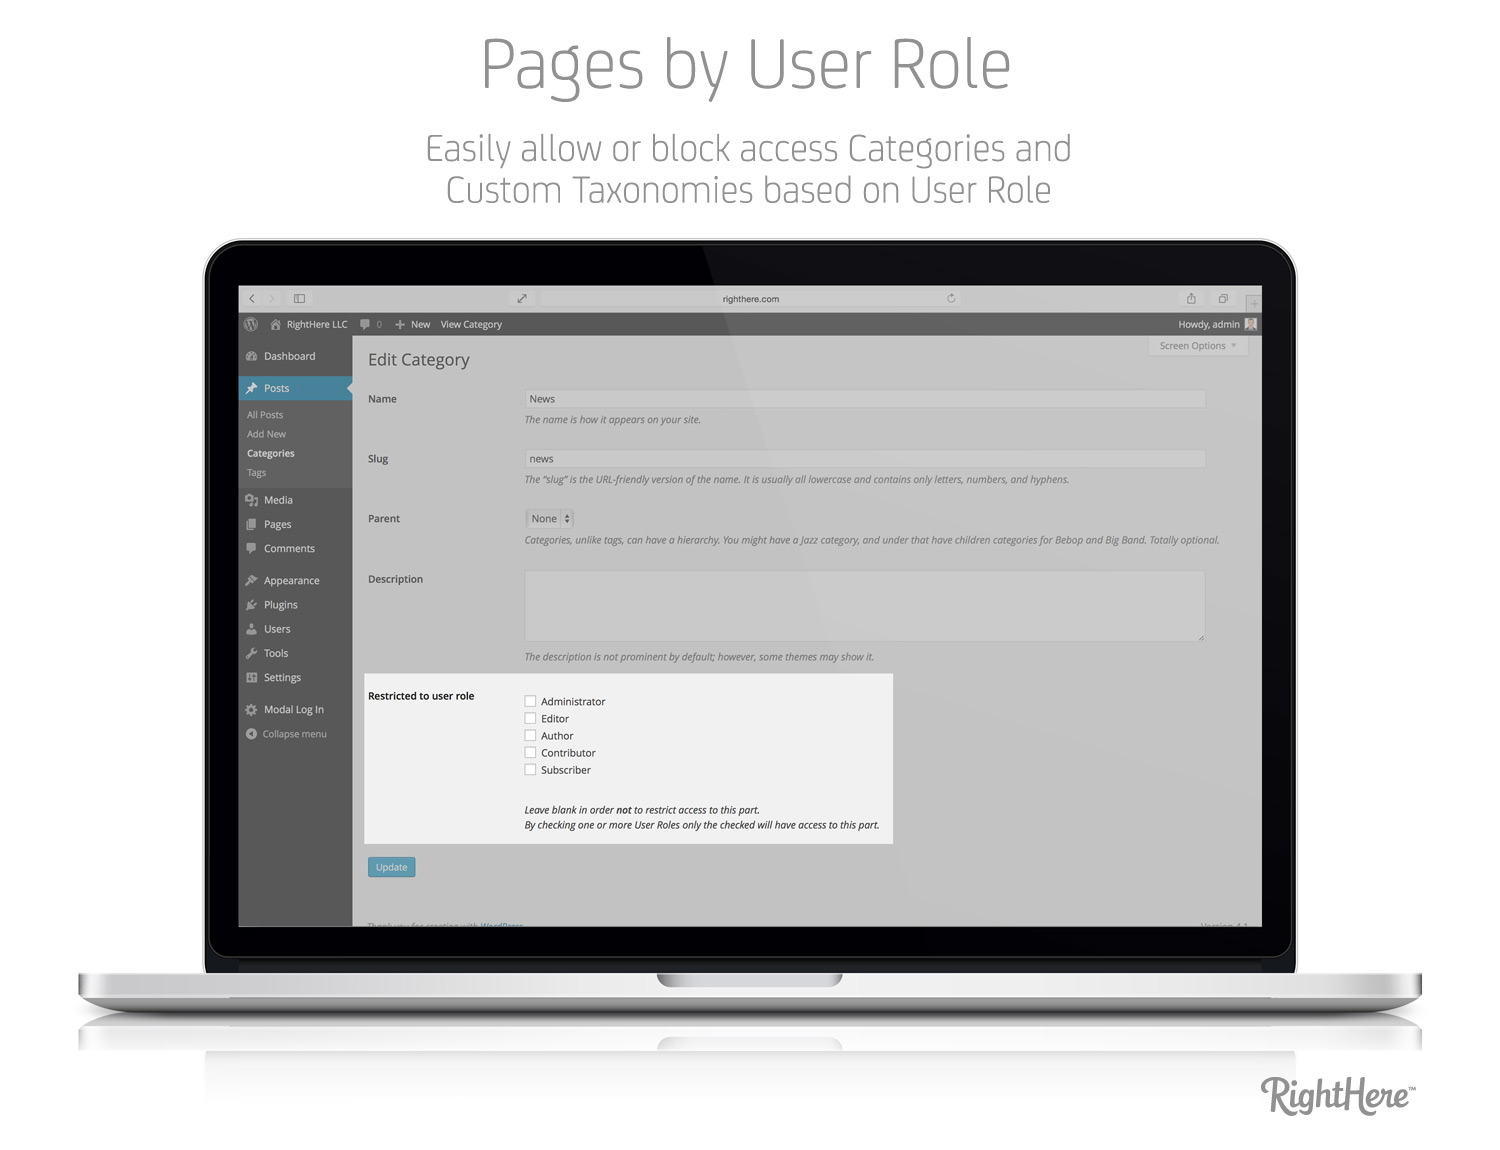 Pages by User Role for WordPress - Restrict access to Category